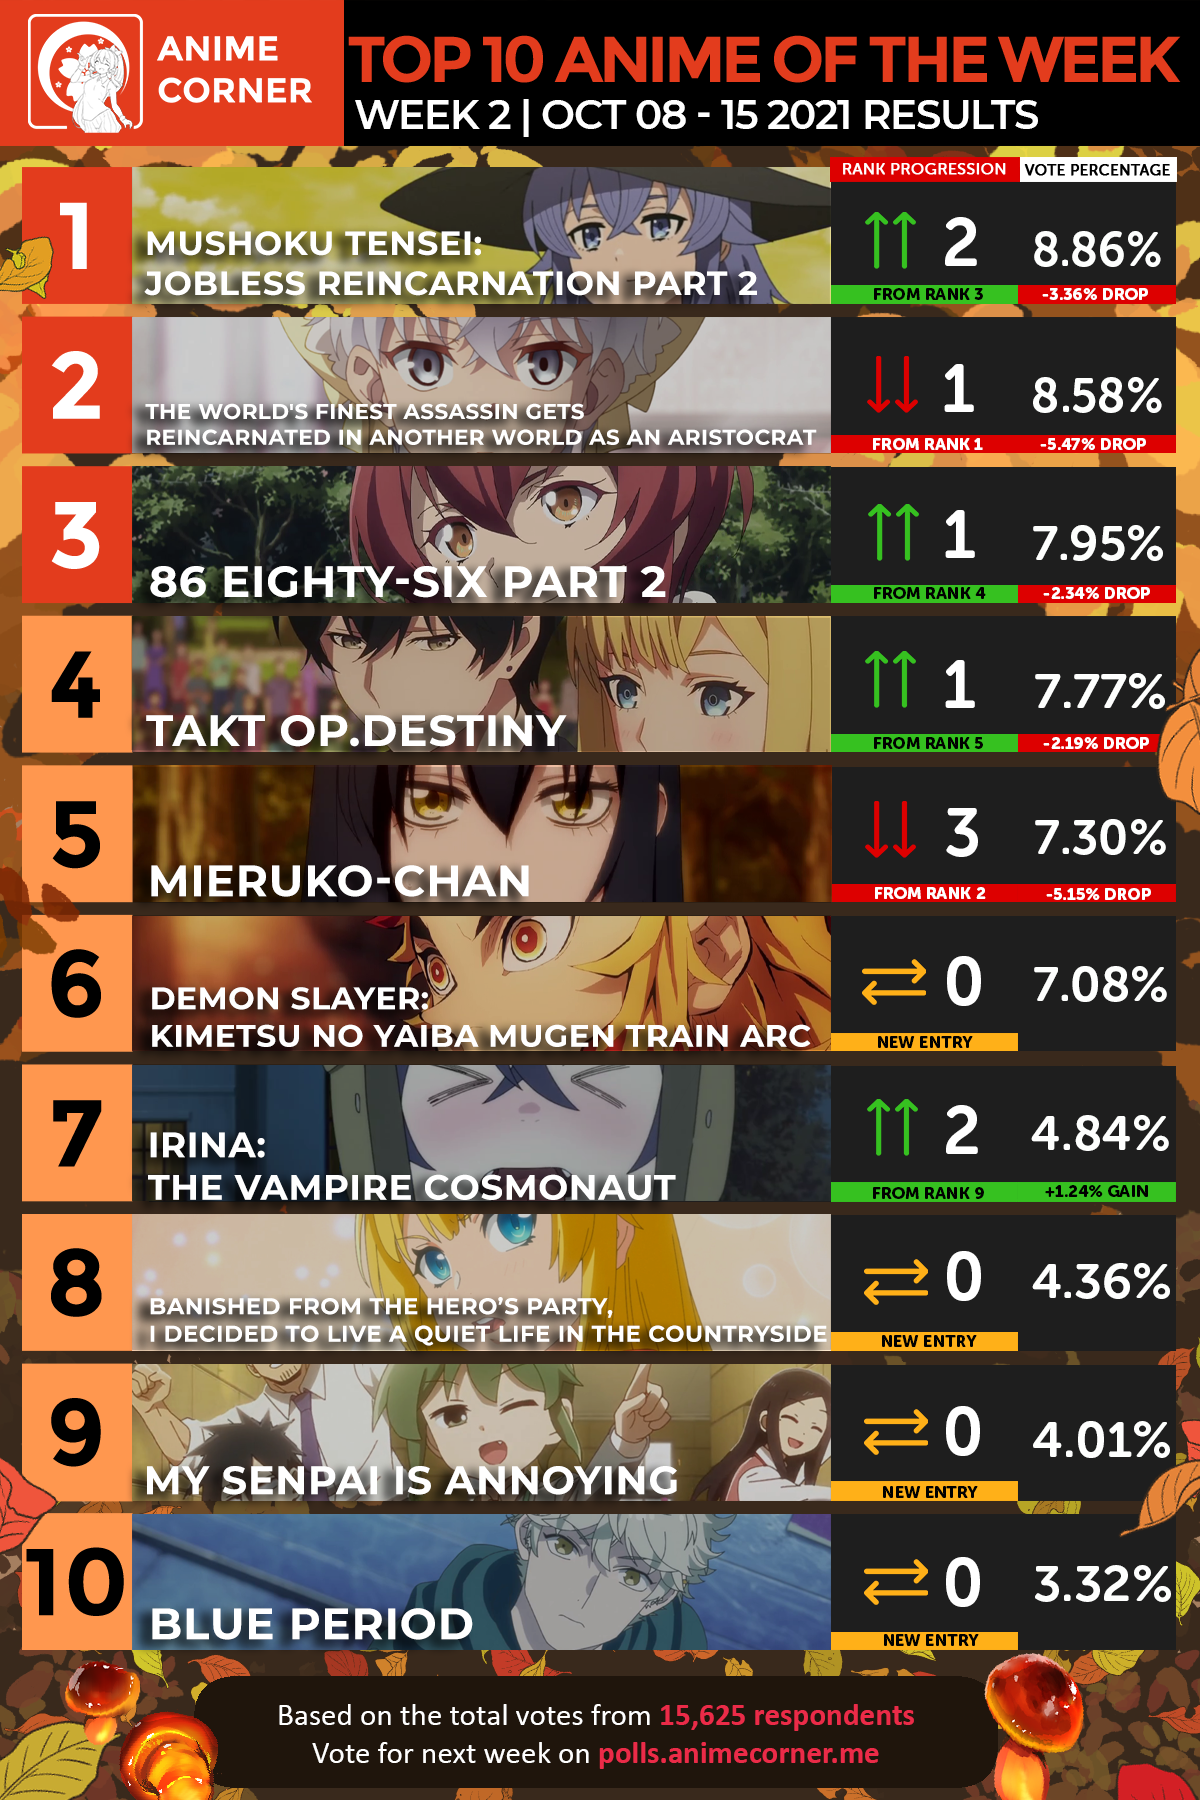 Top 10 Anime of the Week 02 - Fall 2021